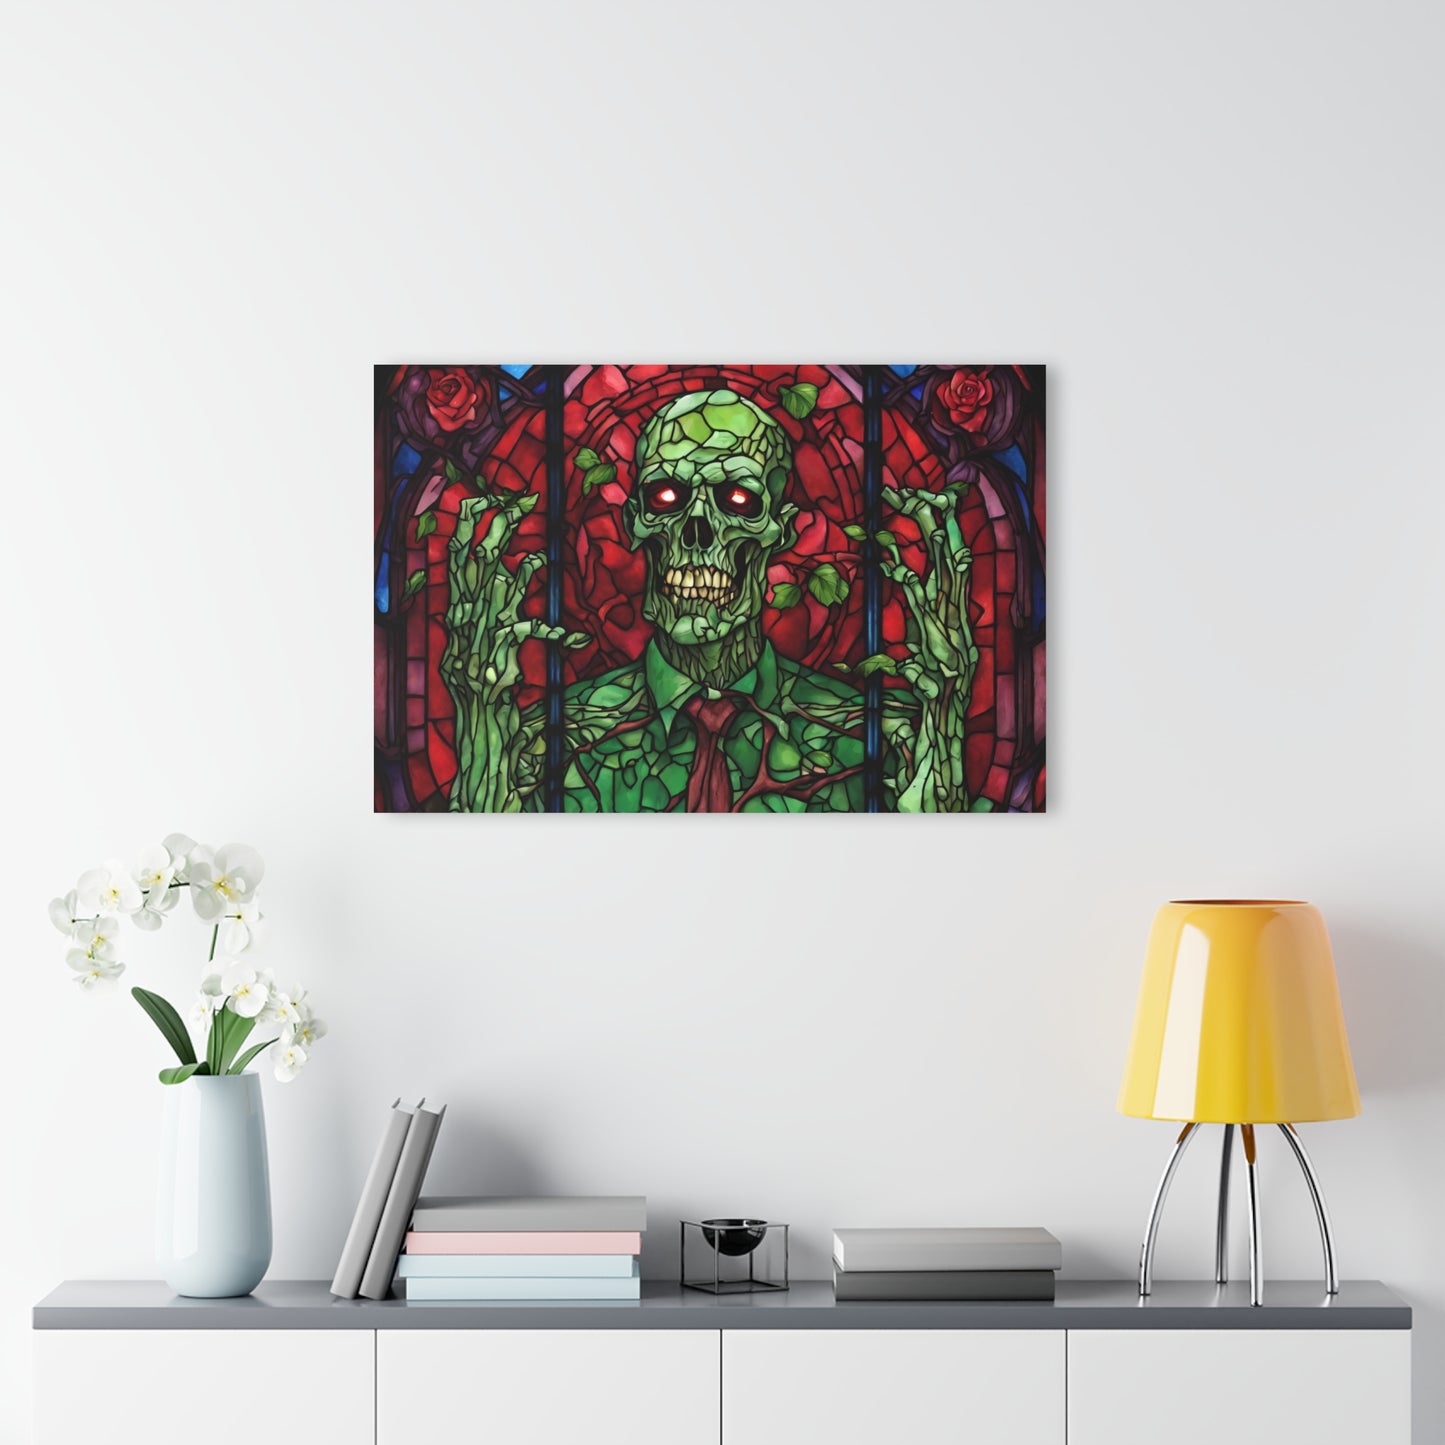 Green Zombie Stained Glass Acrylic Print, Wall Art, Skull and Rose Print